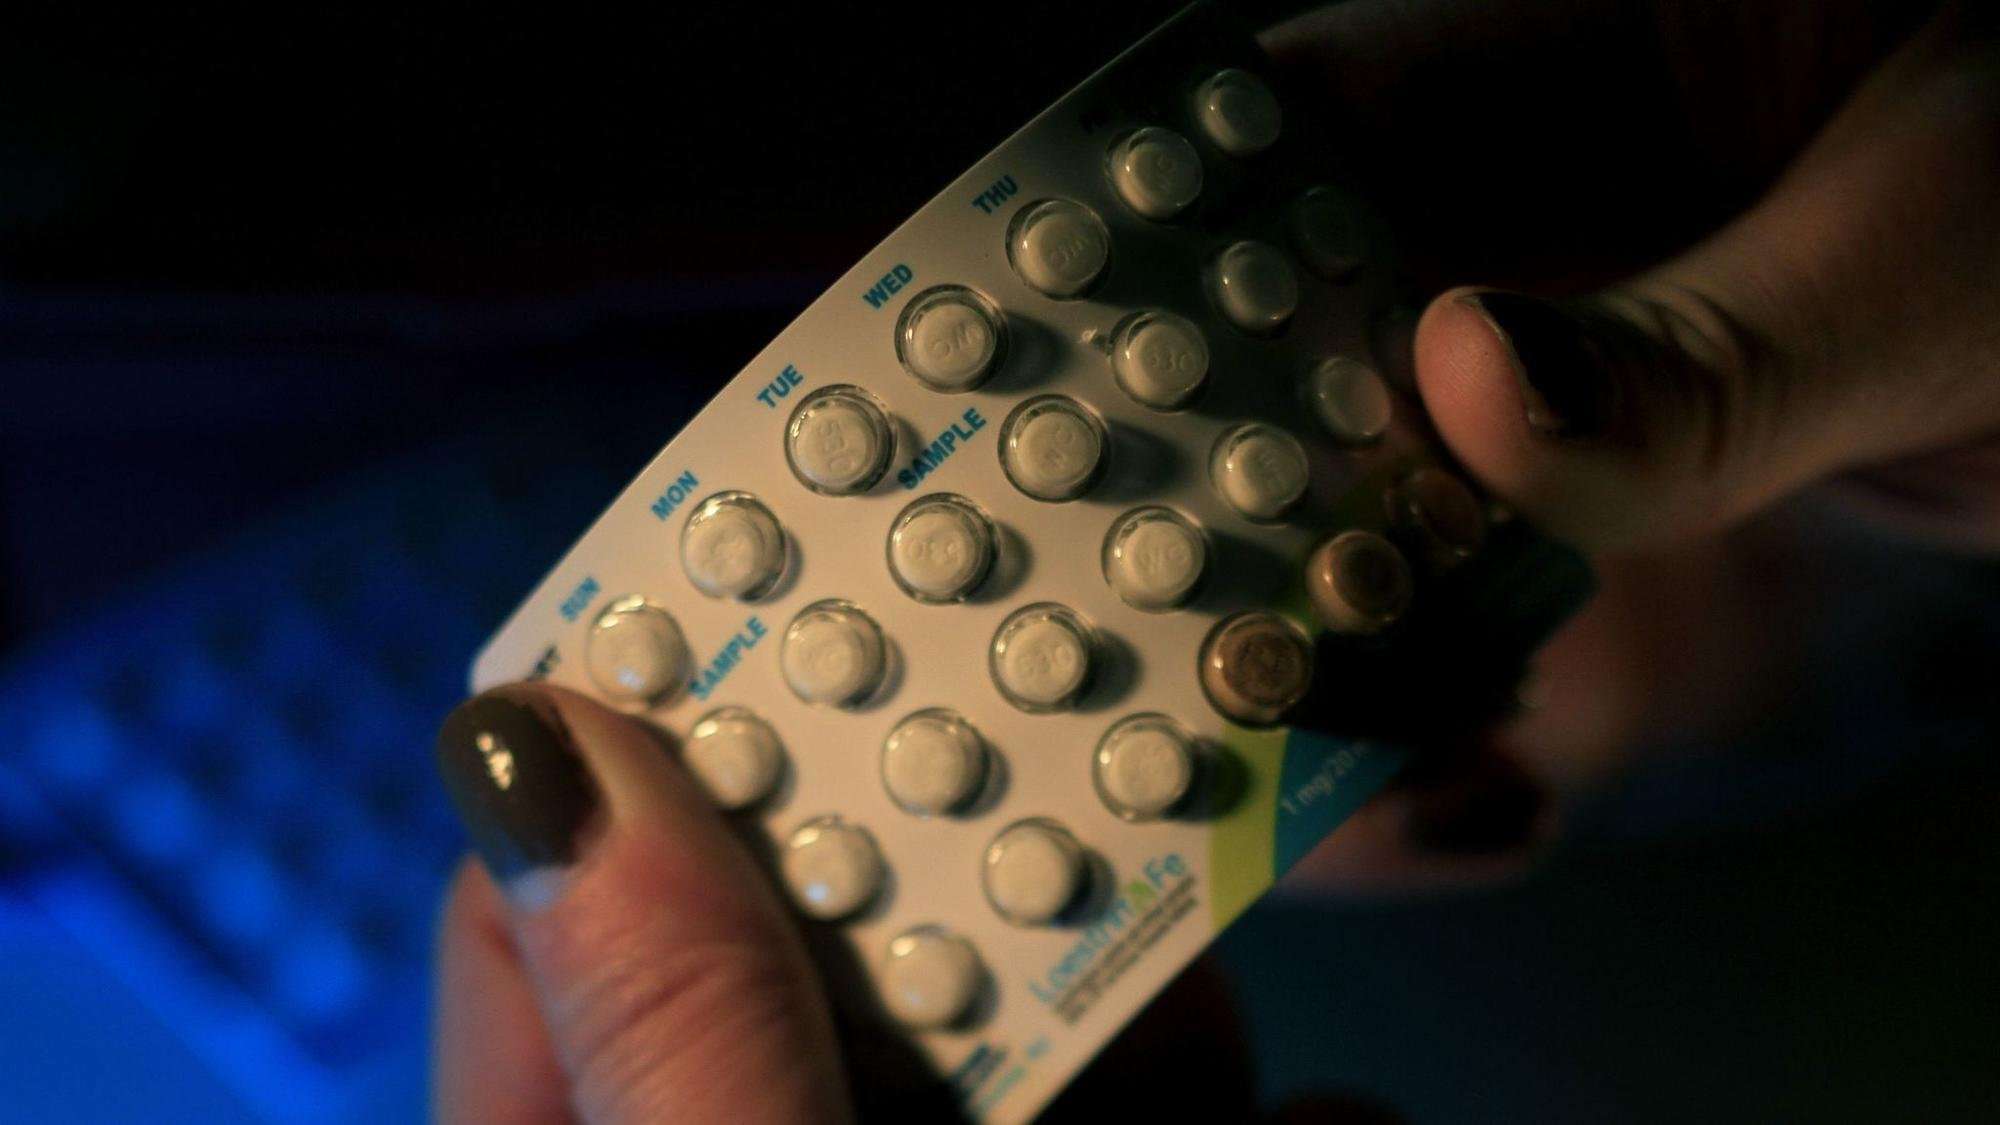 image for Allowing employers a 'moral exemption' from offering birth control coverage is immoral